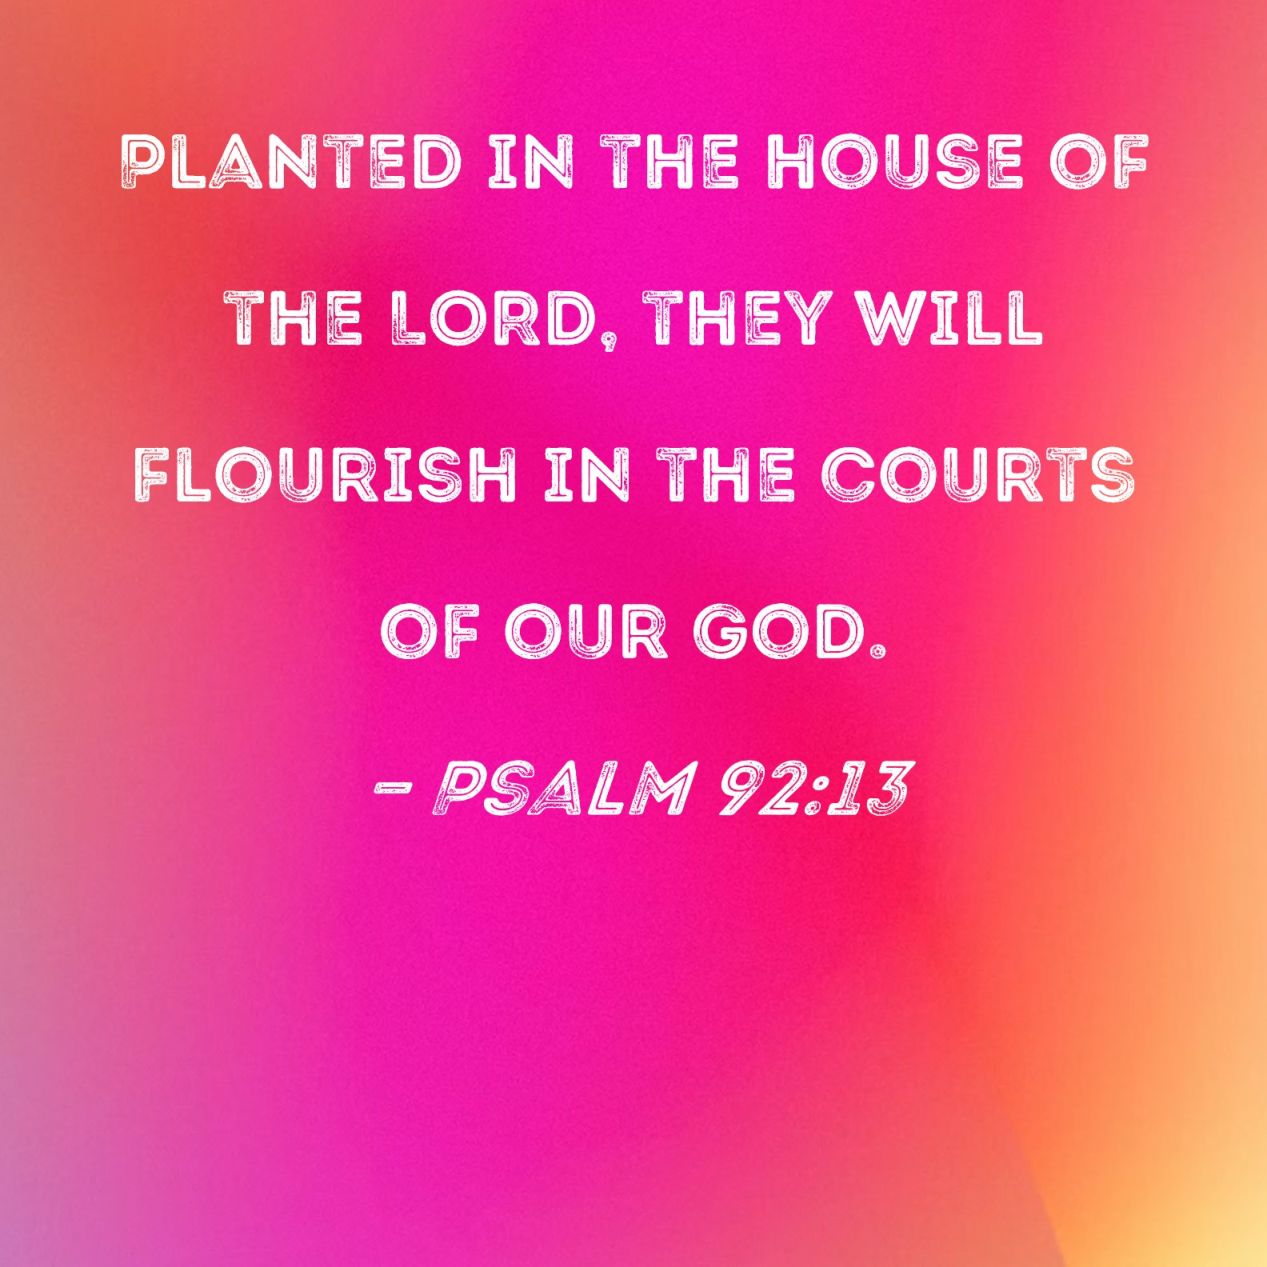 Psalm : Planted in the house of the LORD, they will flourish